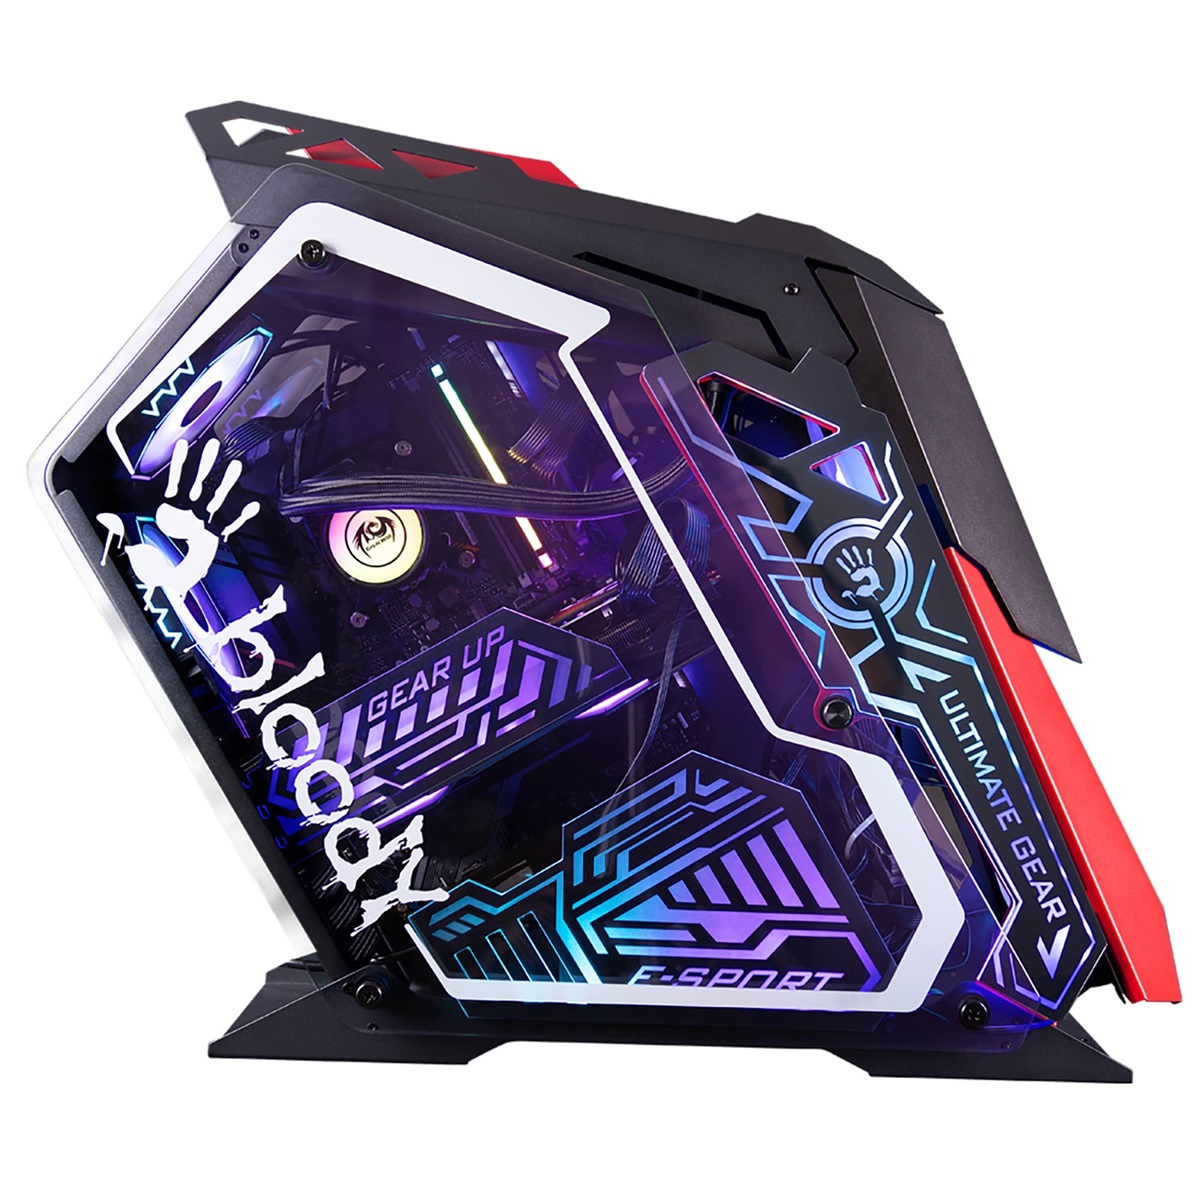 A4tech Bloody GH-30 Rogue Mid Tower Gaming Case Tempered Glass Panels 5 RGB Fans Front I/O USB 3.0 